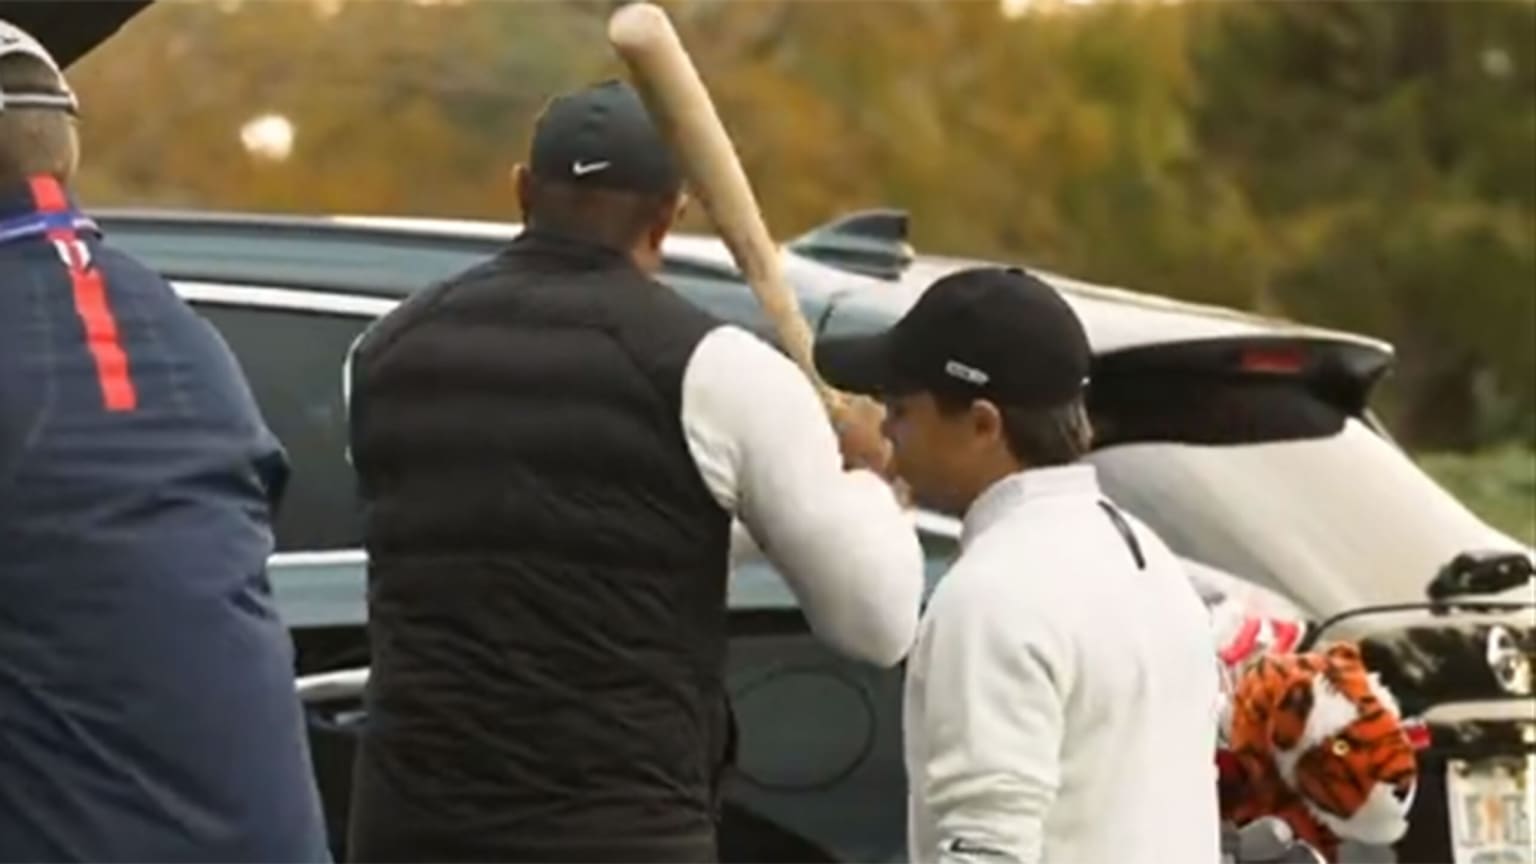 Tiger Woods, seen from behind wearing a black vest, holds a baseball bat, ready to swing